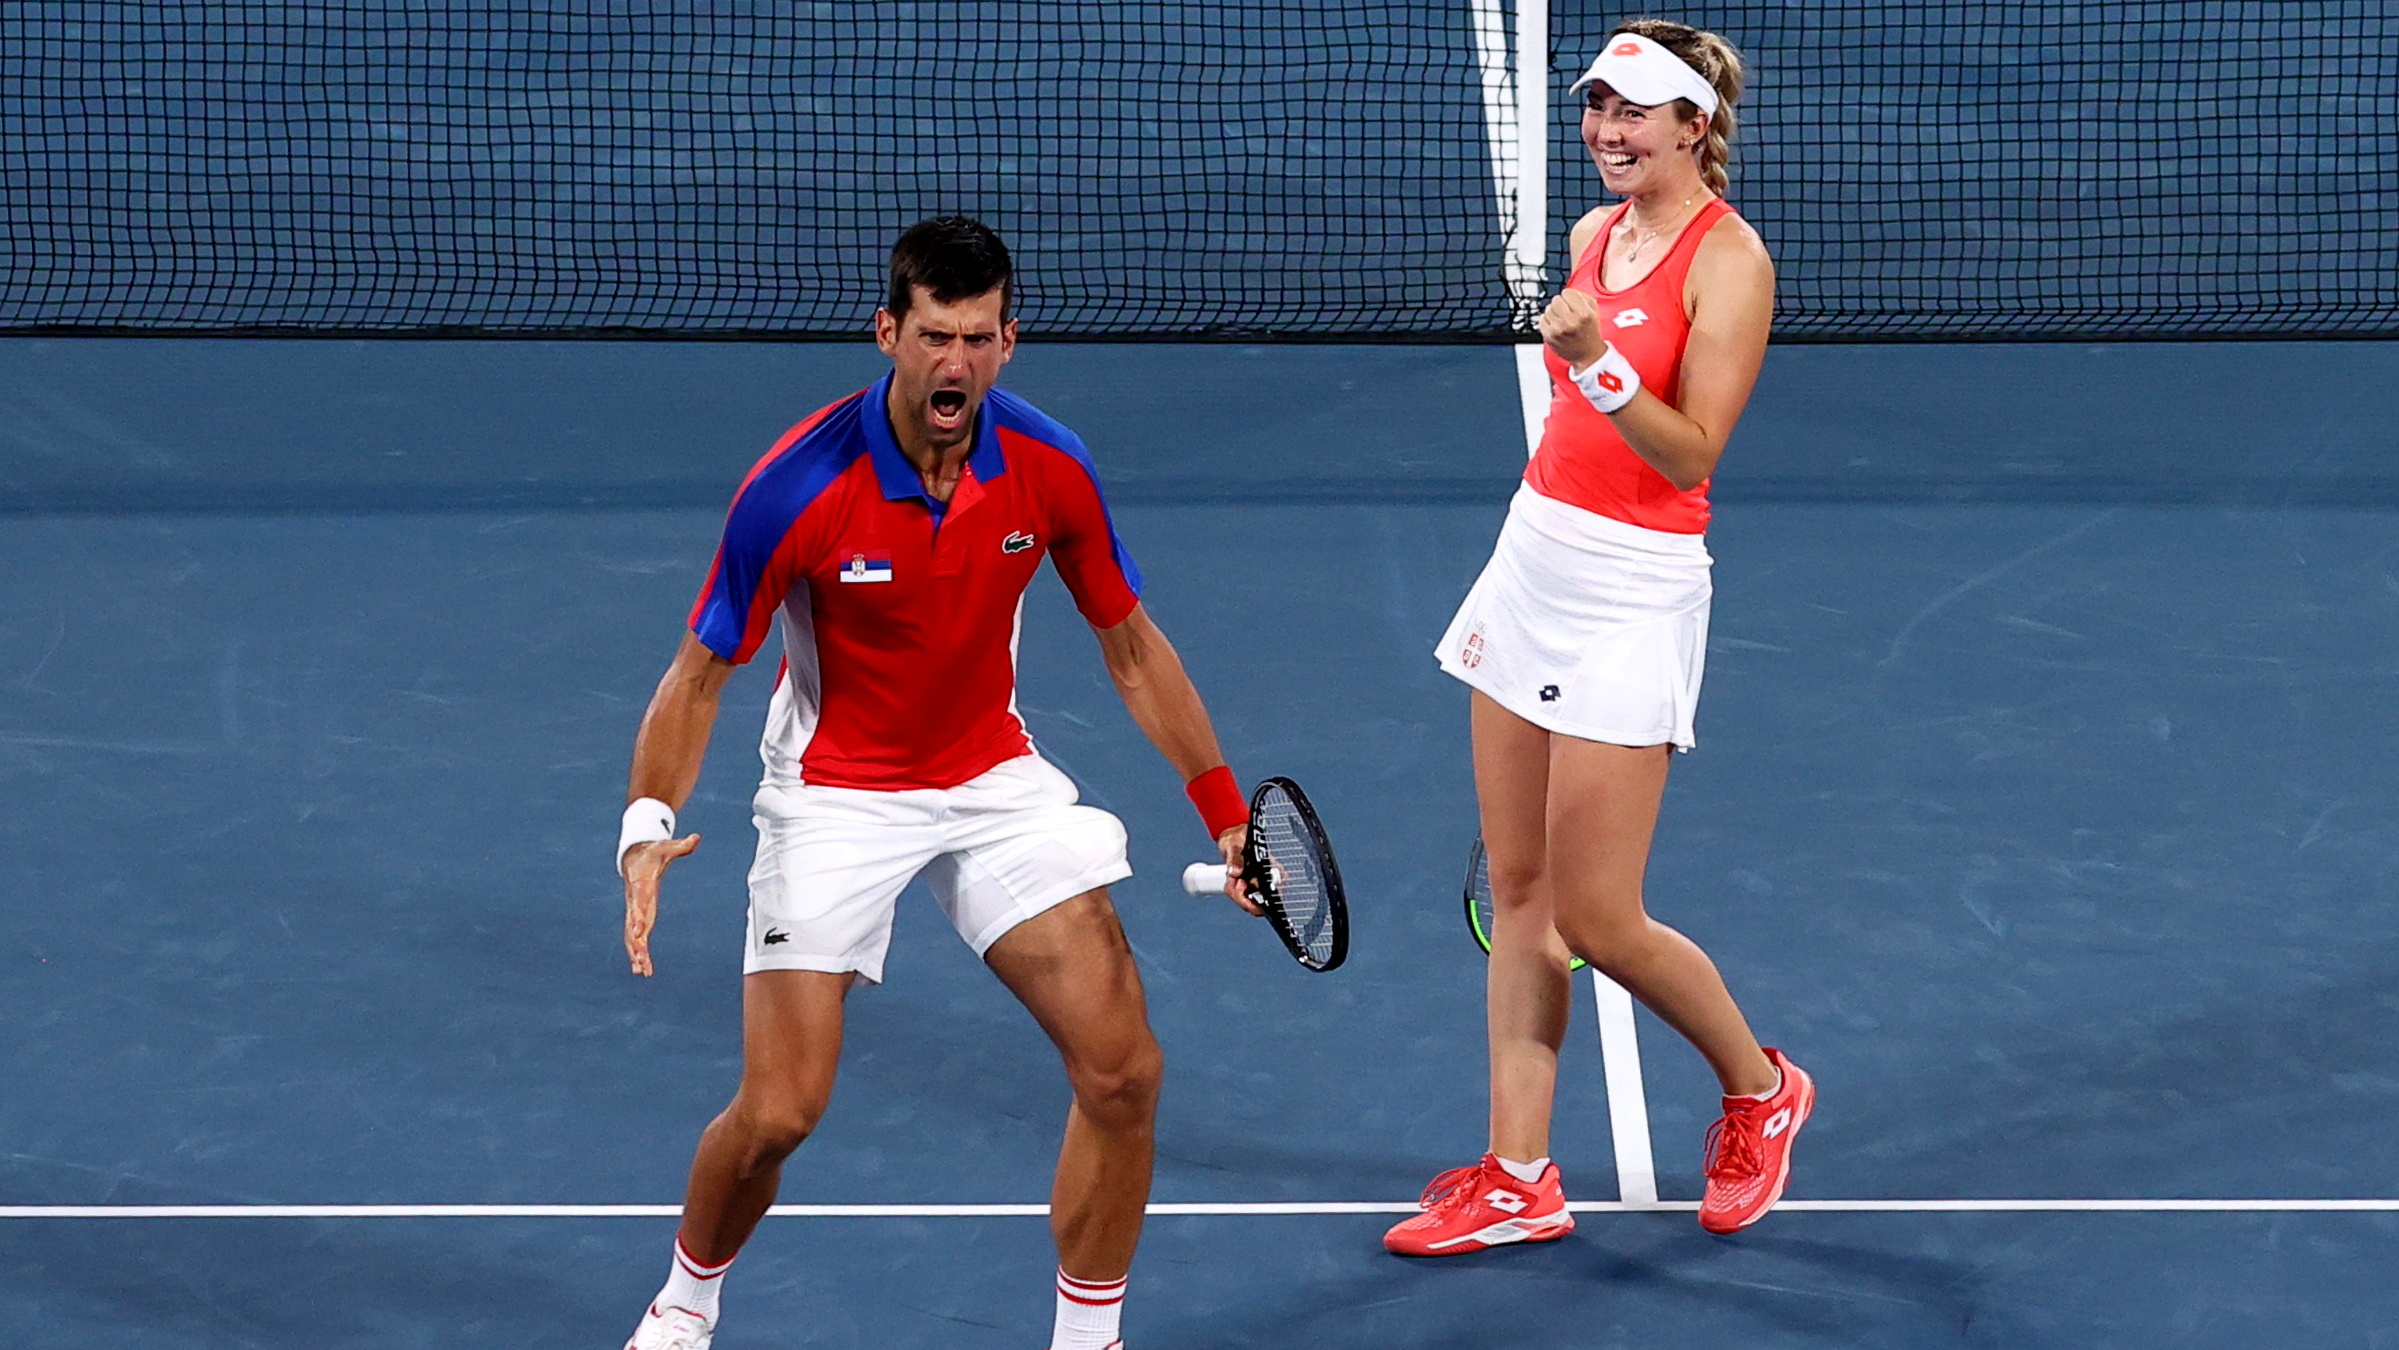 Tokyo 2020 Olympics - Tennis - Mixed Doubles - Round 1 - Ariake Tennis Park - Tokyo, Japan - July 28, 2021. Nina Stojanovic of Serbia and Novak Djokovic of Serbia celebrate after winning their first round match against Luisa Stefani of Brazil and Marcelo Melo of Brazil REUTERS/Edgar Su